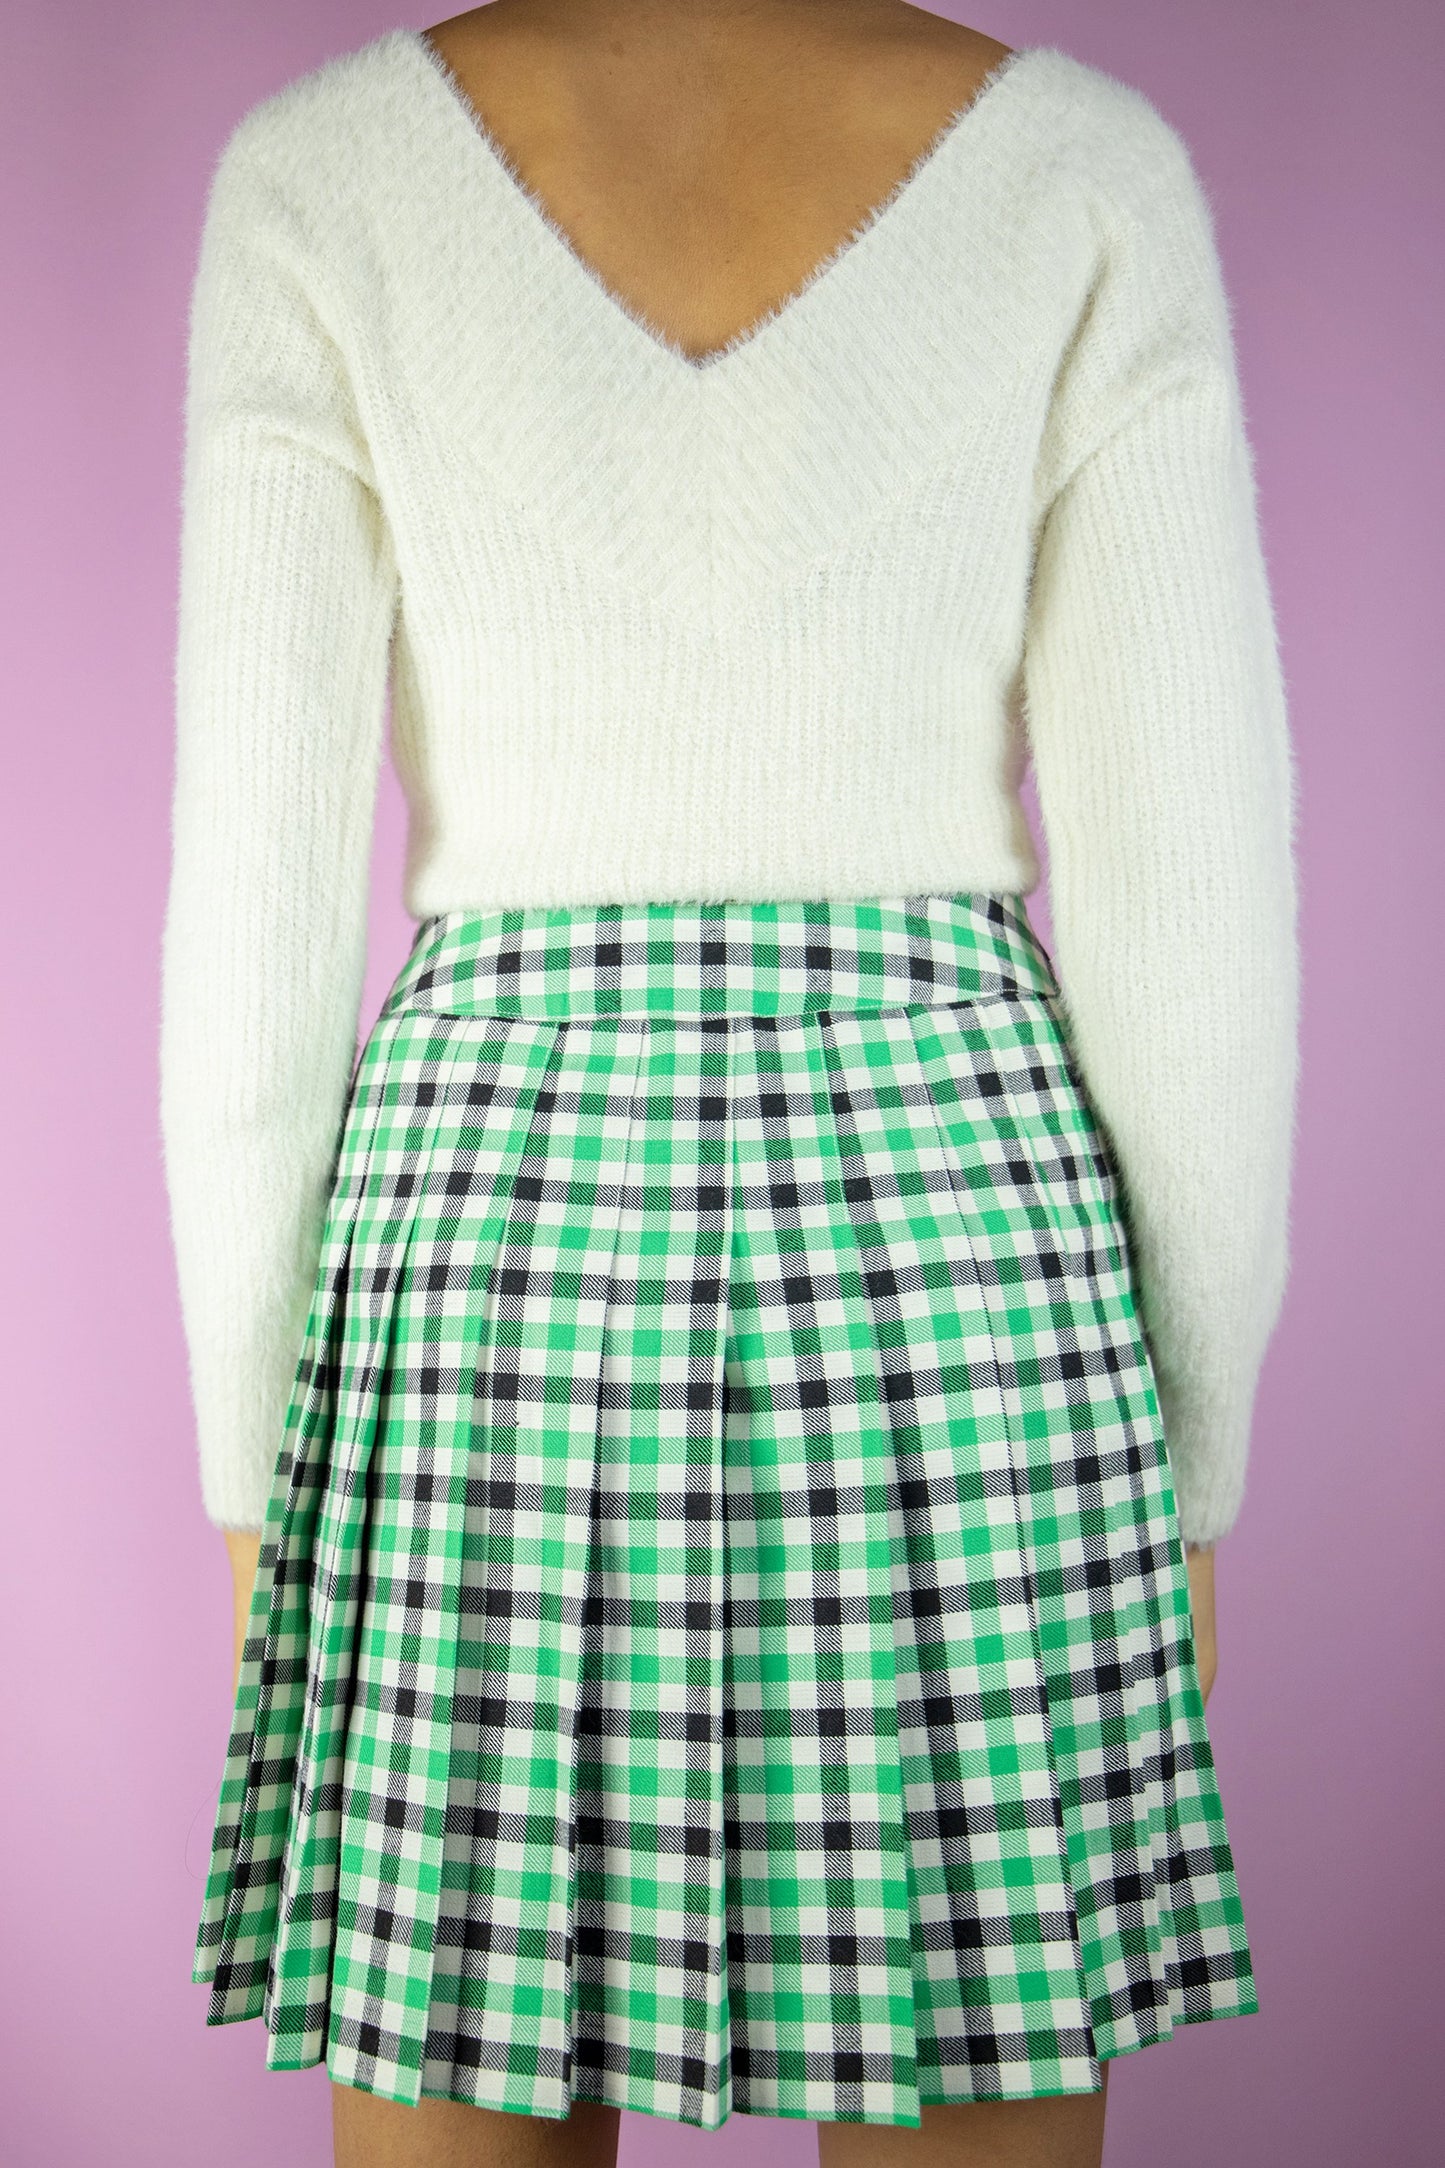 Vintage 80's Green Check Pleated Mini Skirt - XS/S